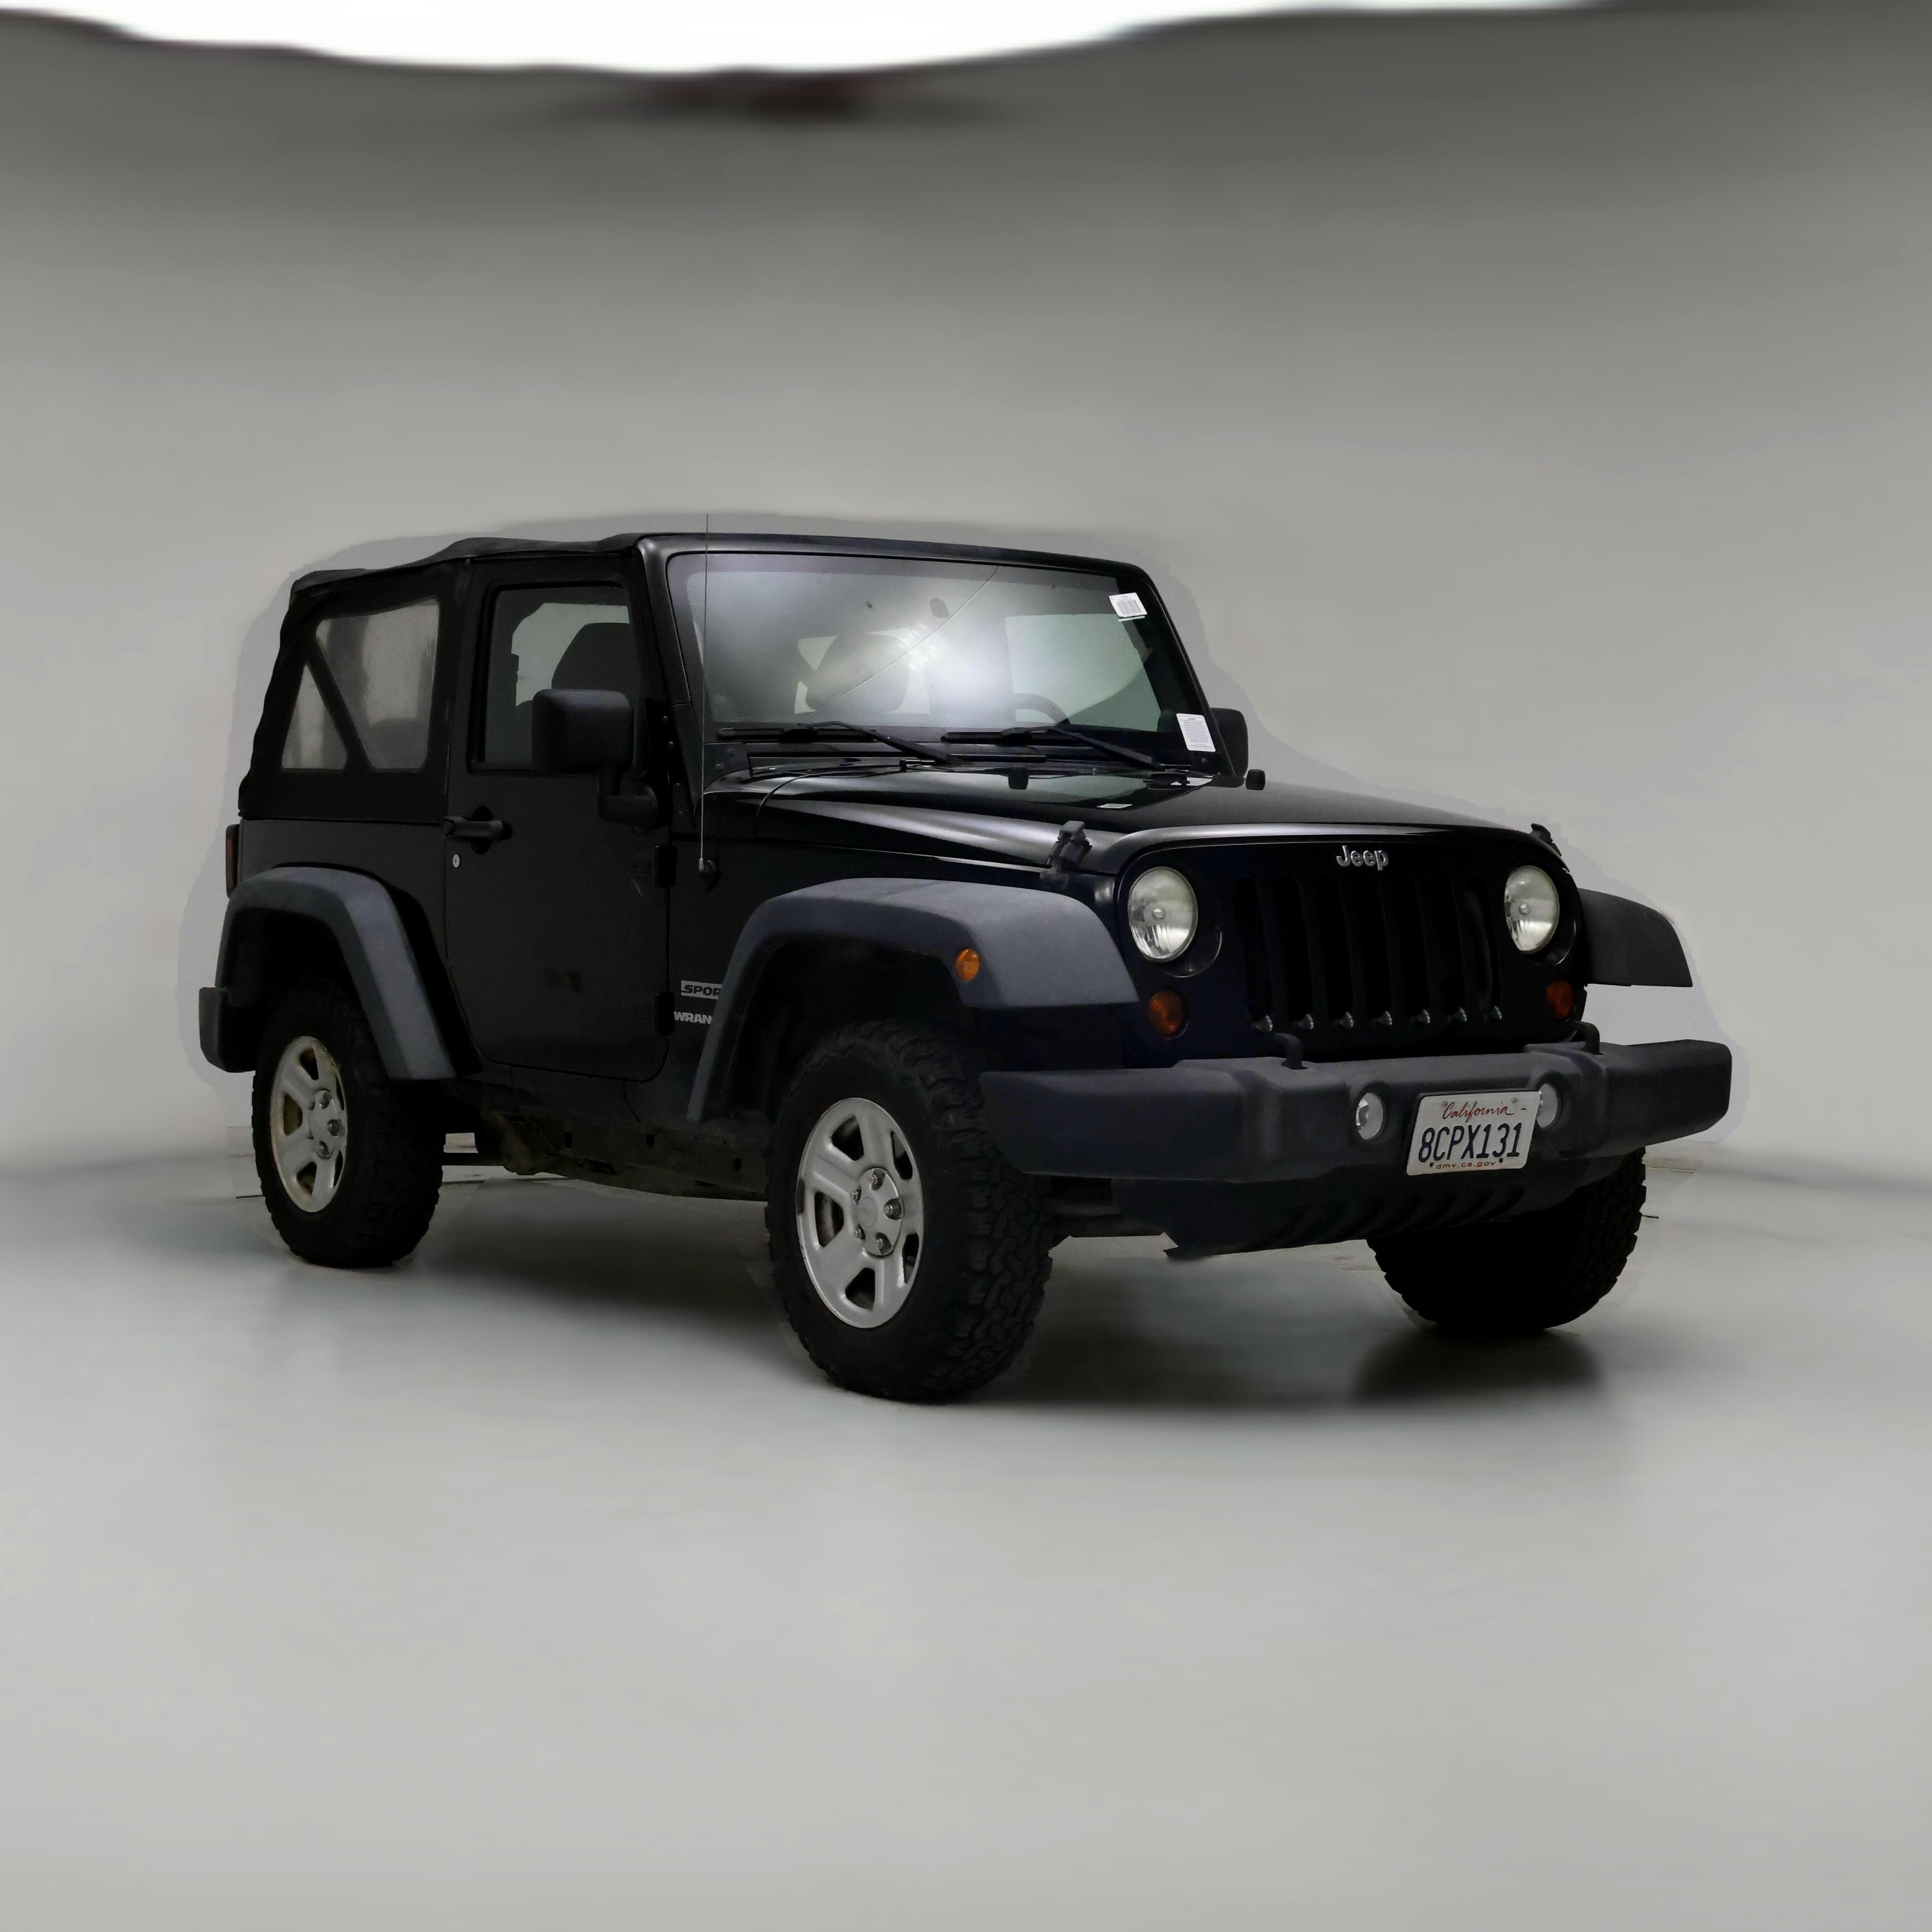 Used 2012 Jeep Wrangler for Sale